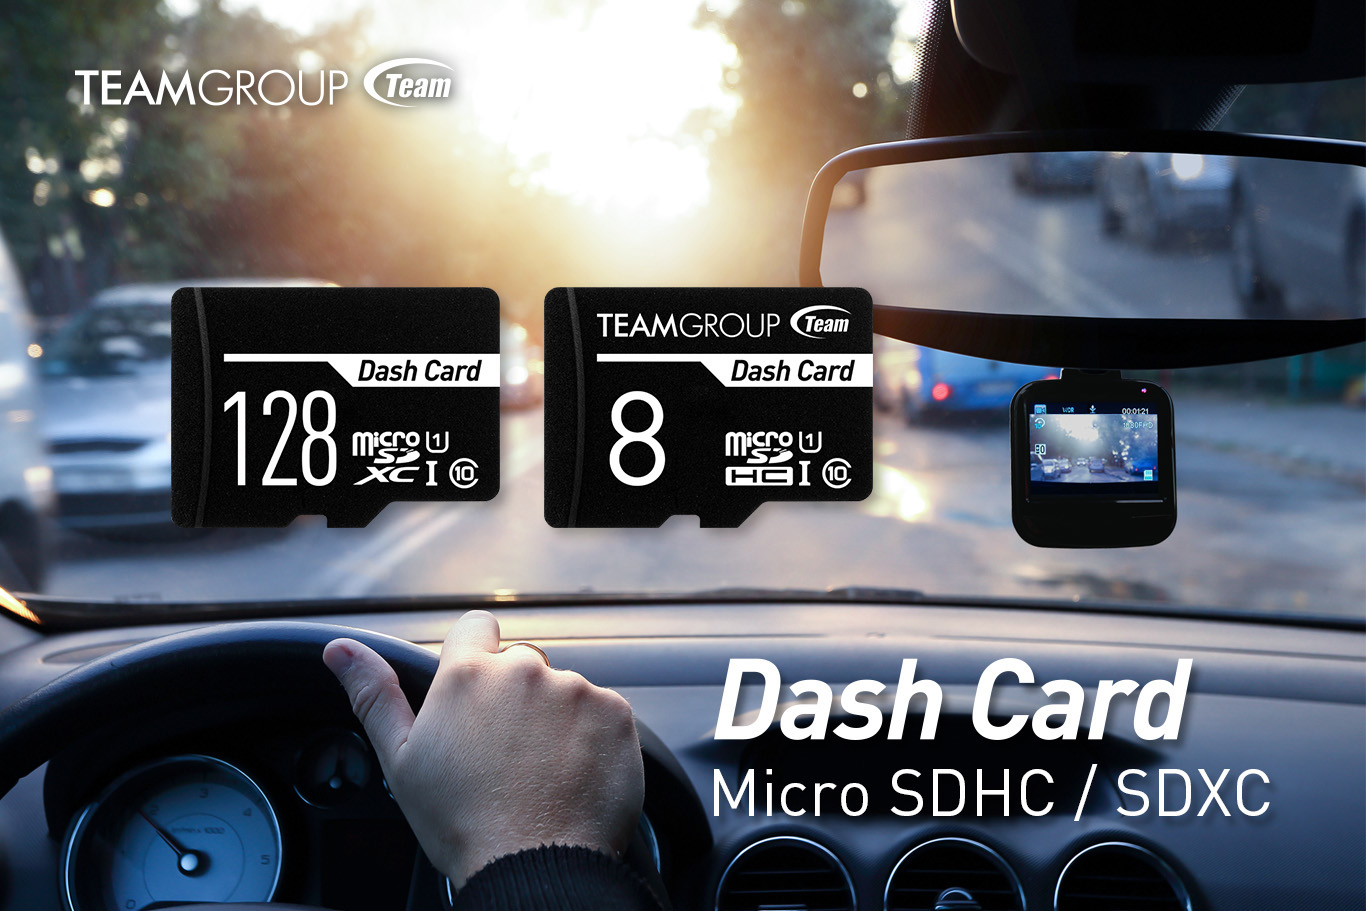 Team Group Dash Cards 128 and 8 in Front of a Lifestyle Image of a 1st Person Perspective of City-Street Driving, along with text that reads: Dash Card Micro SDHC / SDXC